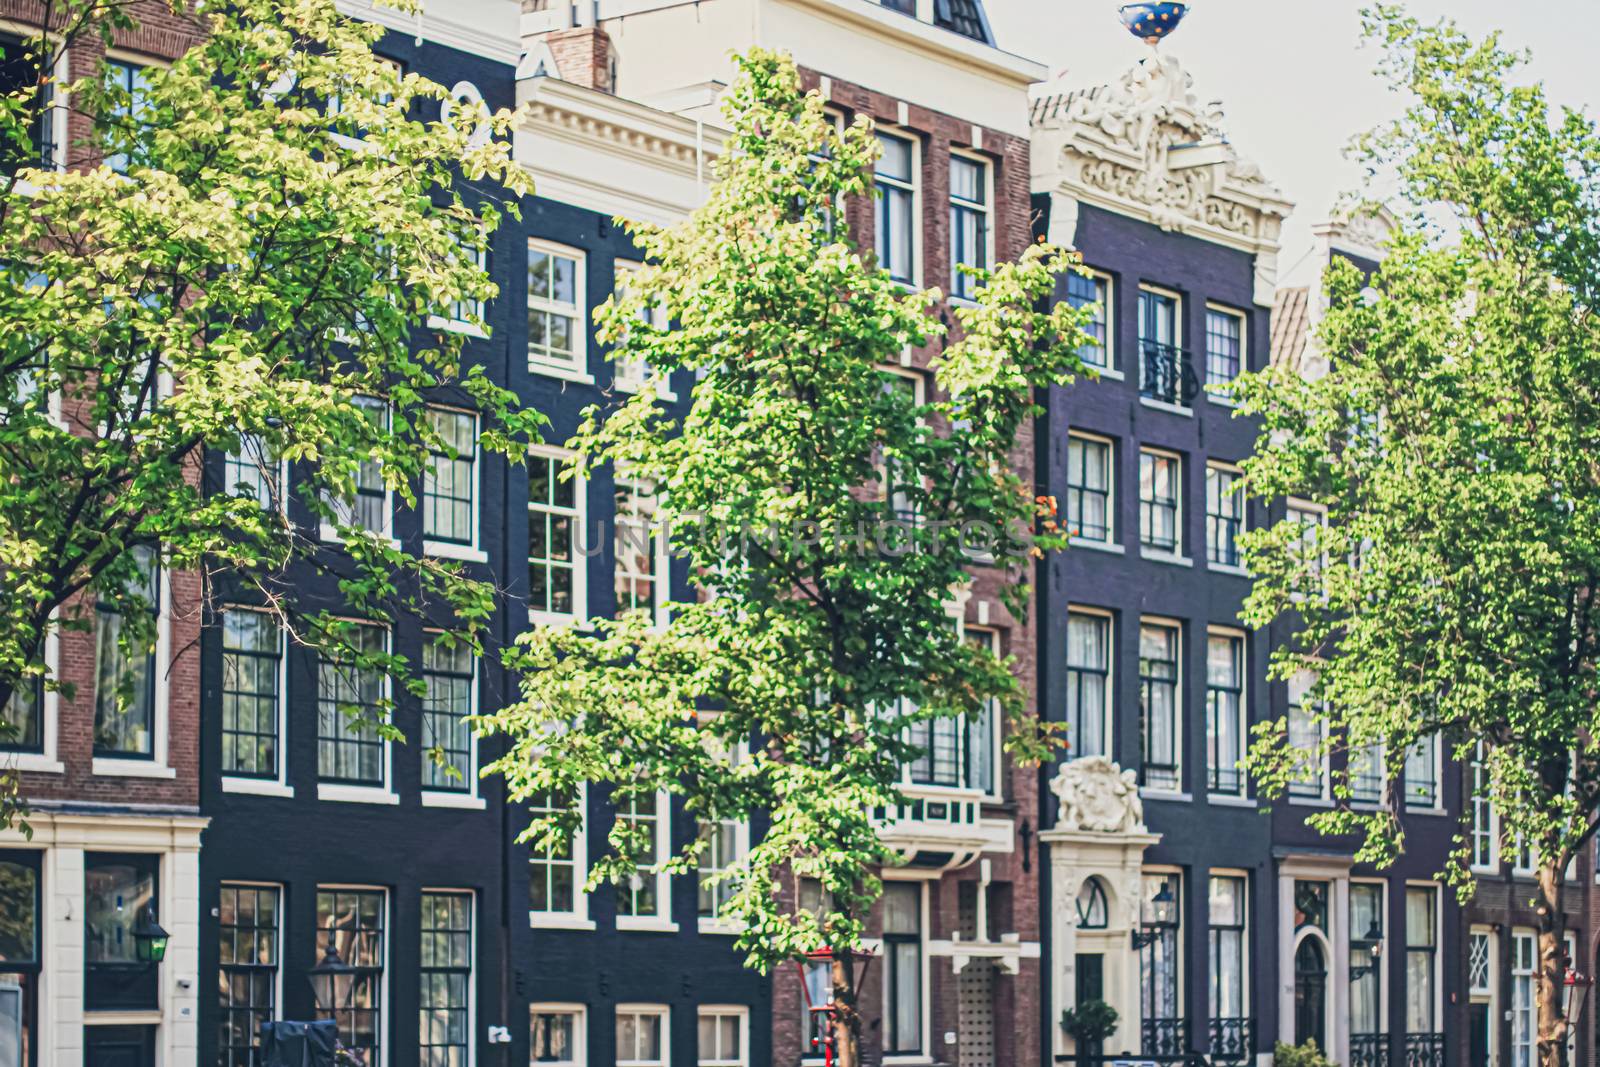 Main downtown street in the city center of Amsterdam in Netherlands on sunny day